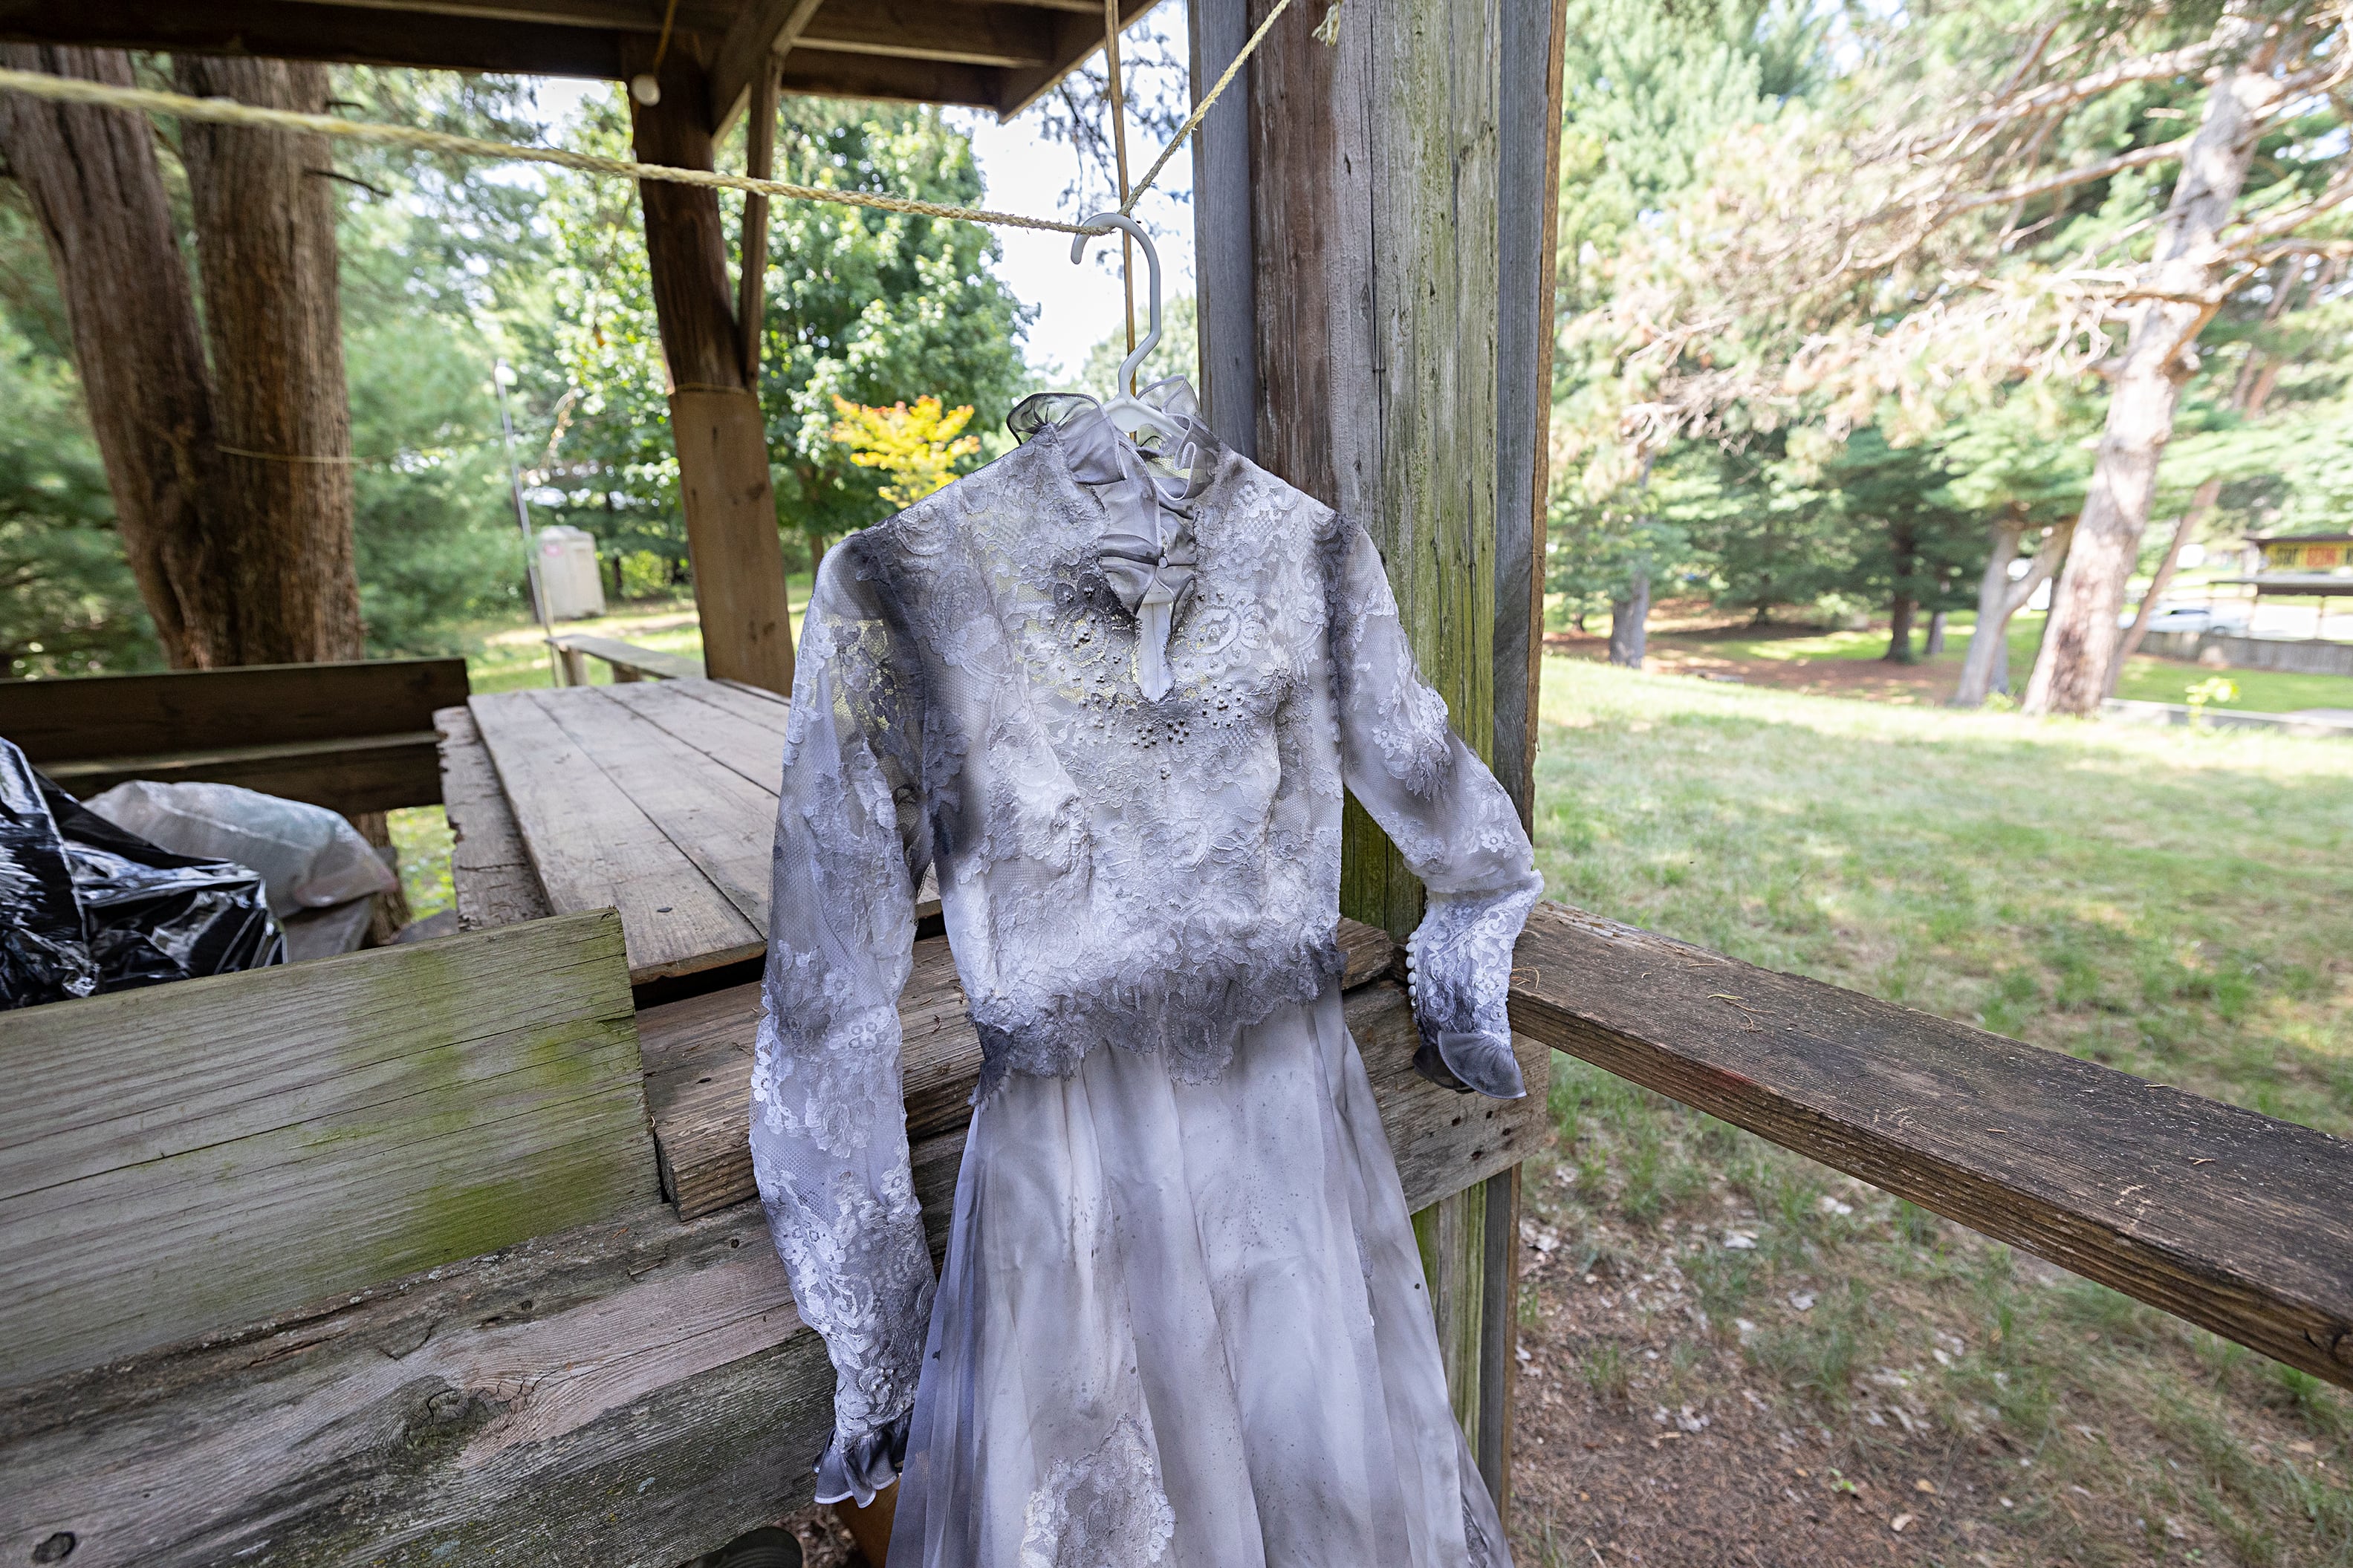 The community has been very giving in costumes, props and equipment to help Haunted Haven get back to what it does best, provide fun scares and creepy scenes.